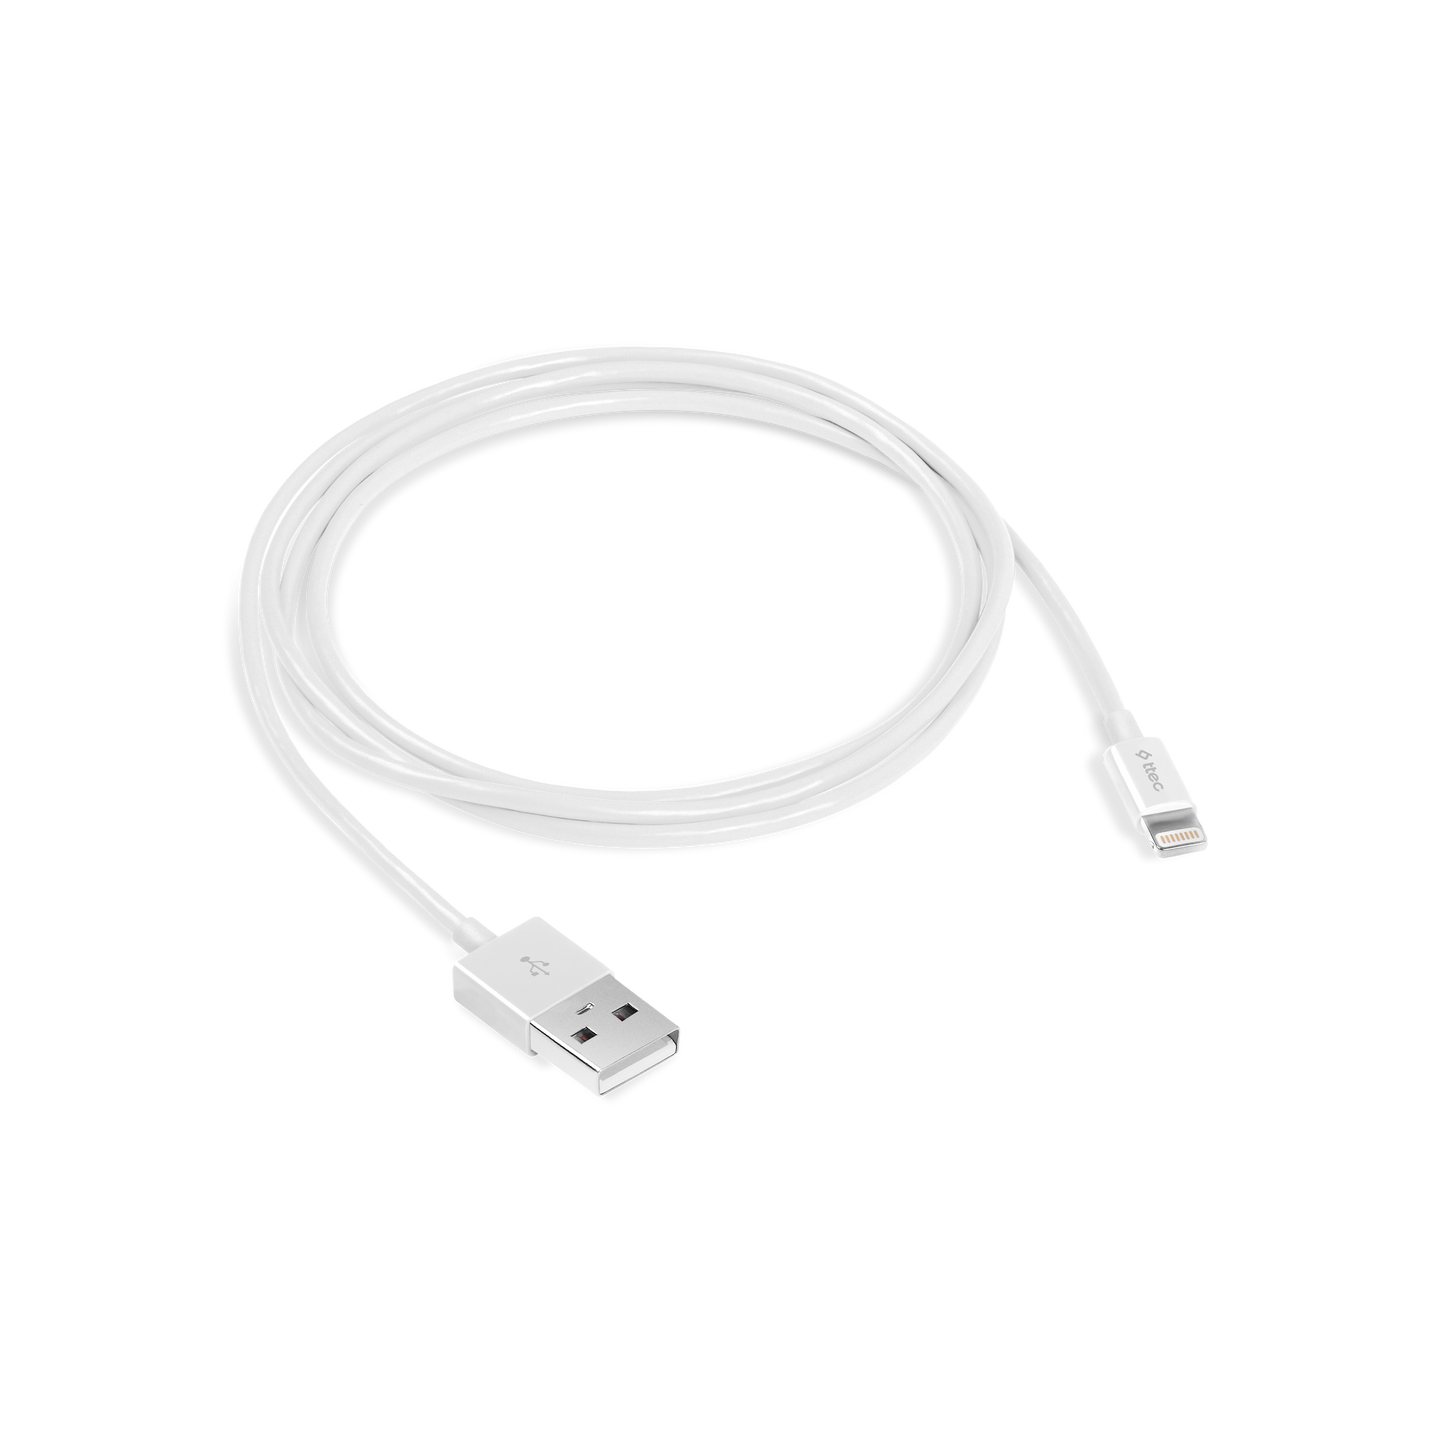 ttec - Lightning USB Charge / Data Cable  | 100cm |  White